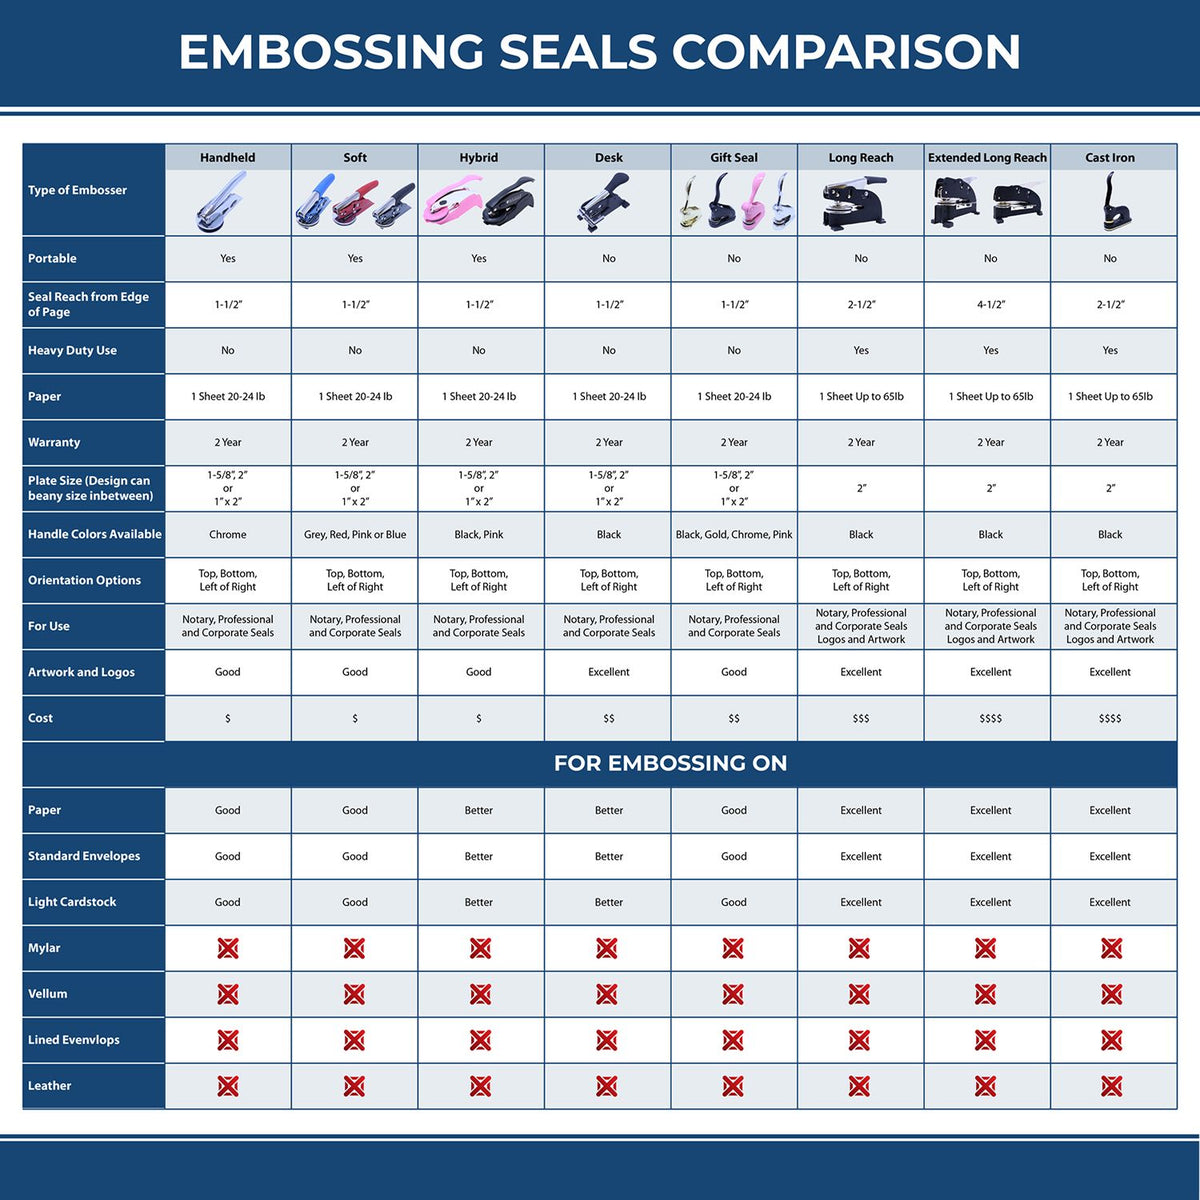 A comparison chart for the different types of mount models available for the Heavy Duty Cast Iron Ohio Geologist Seal Embosser